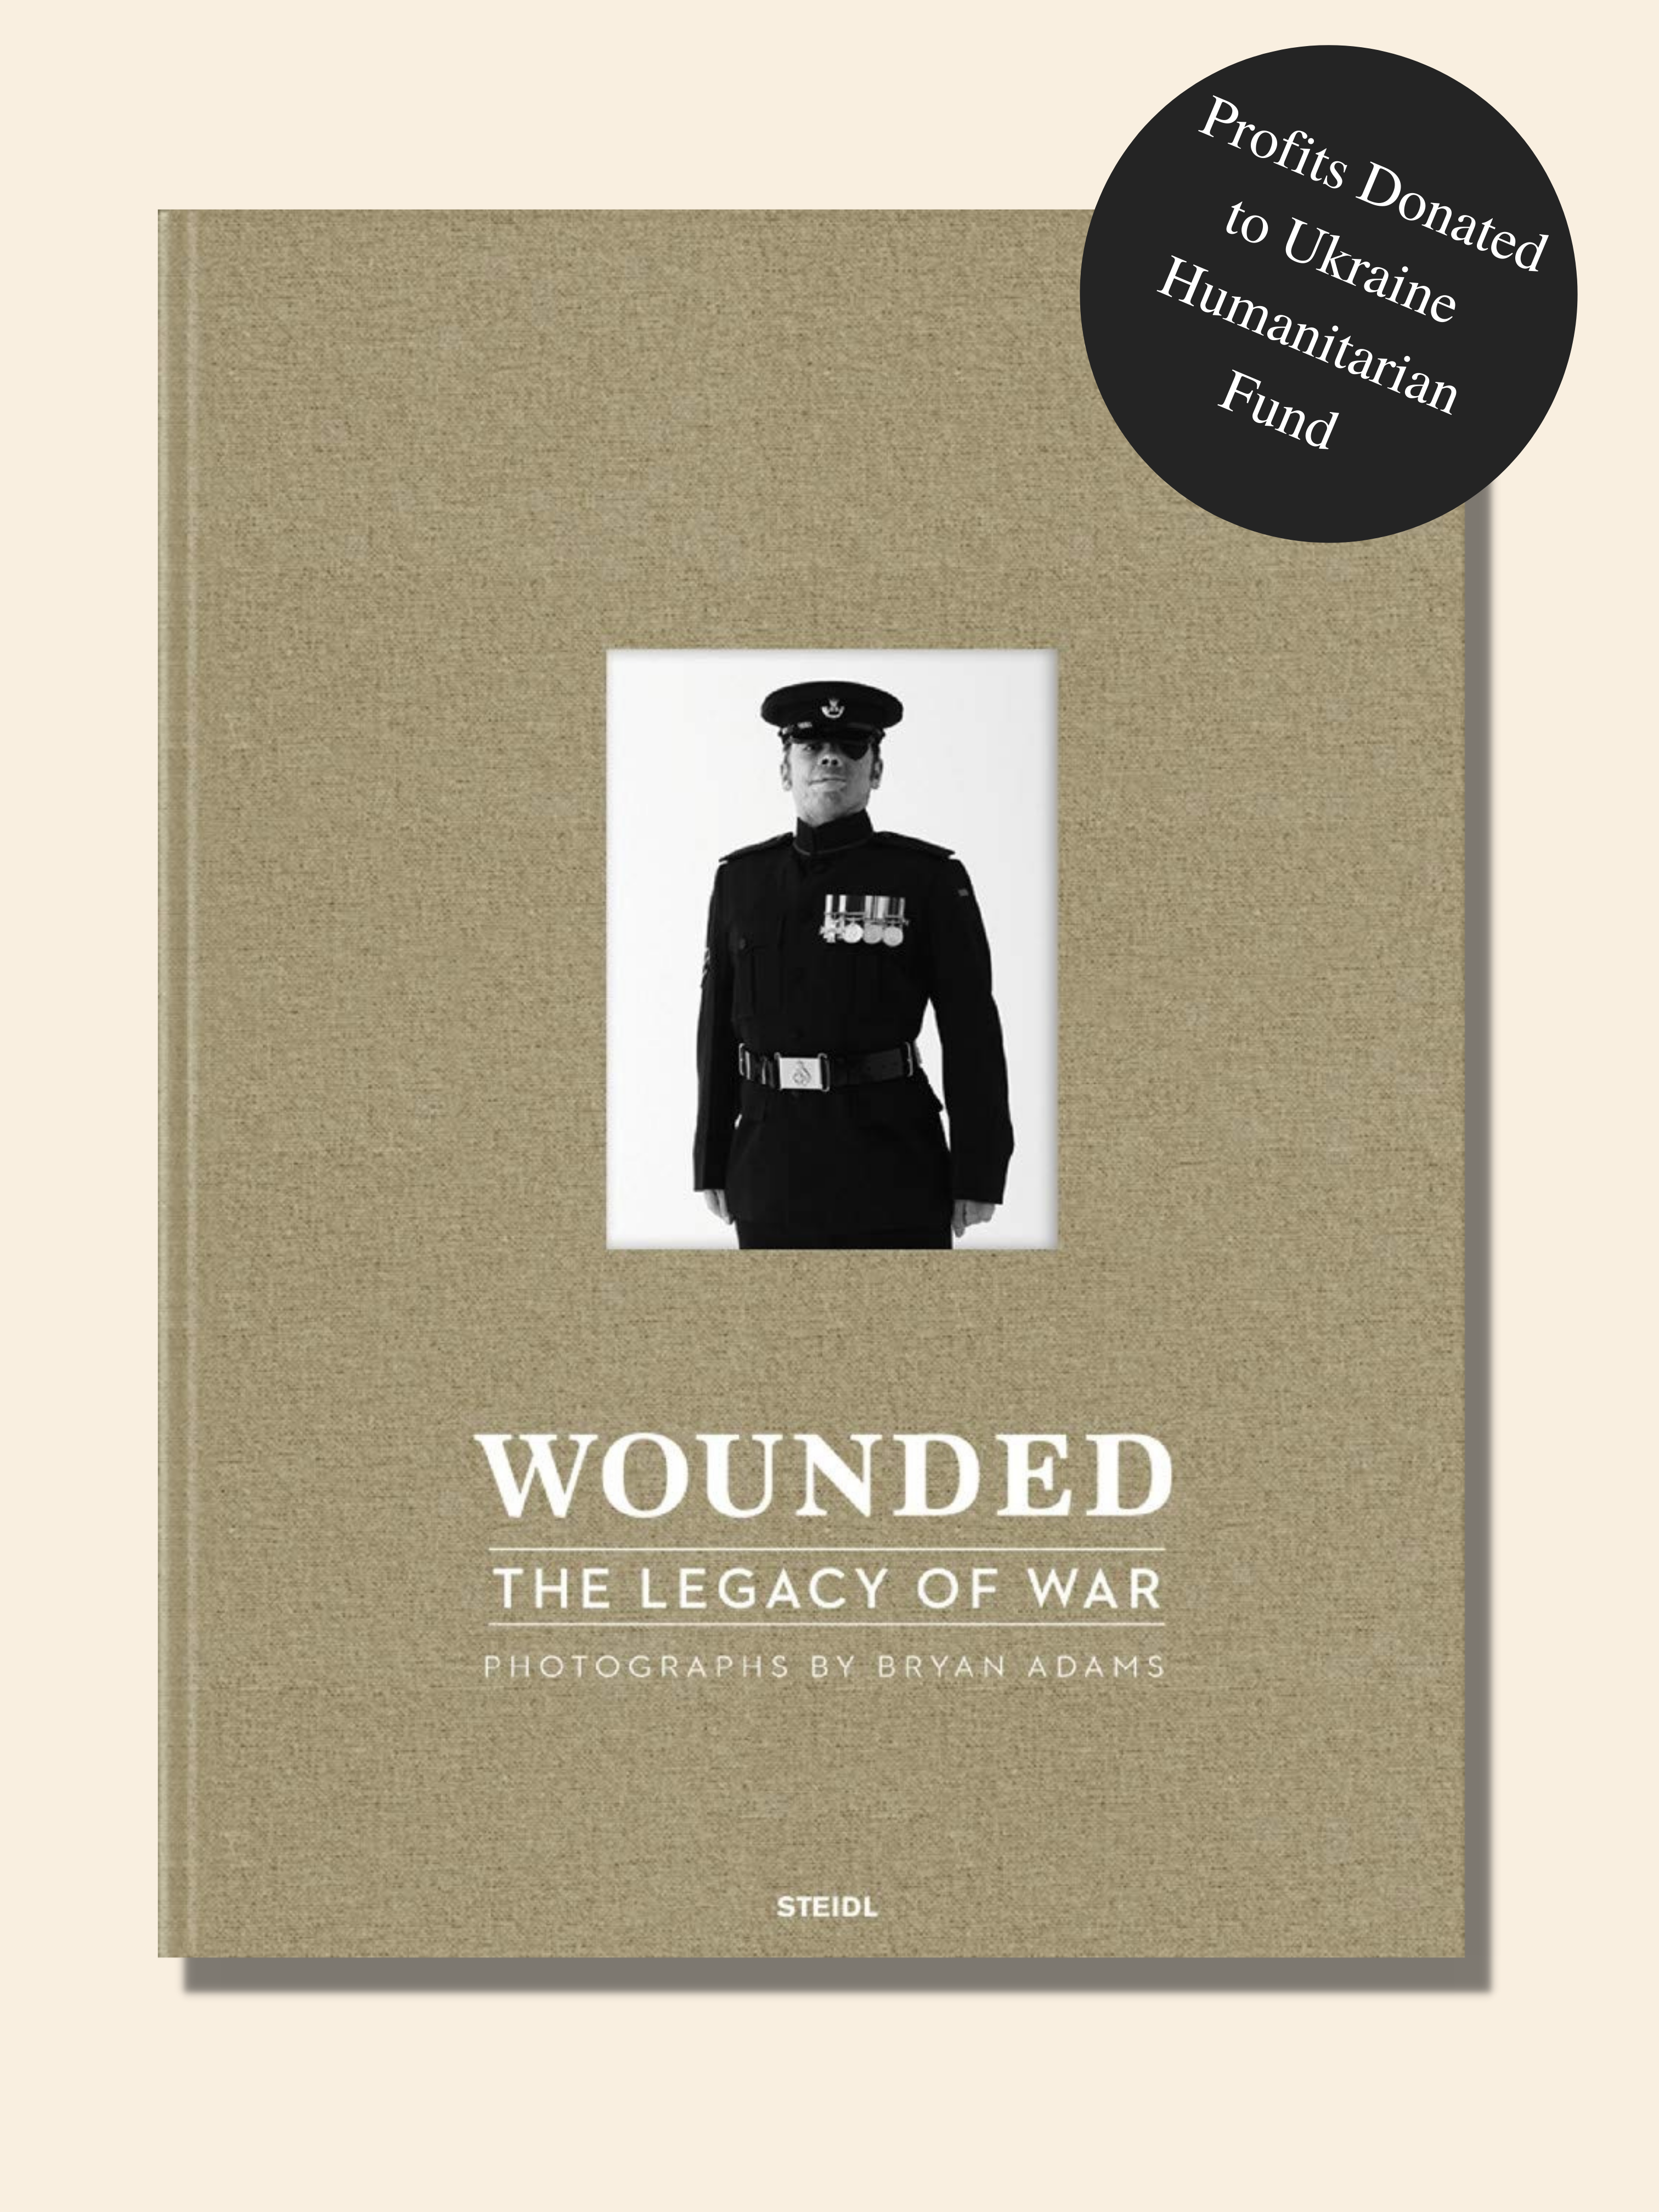 Wounded - The Legacy of War